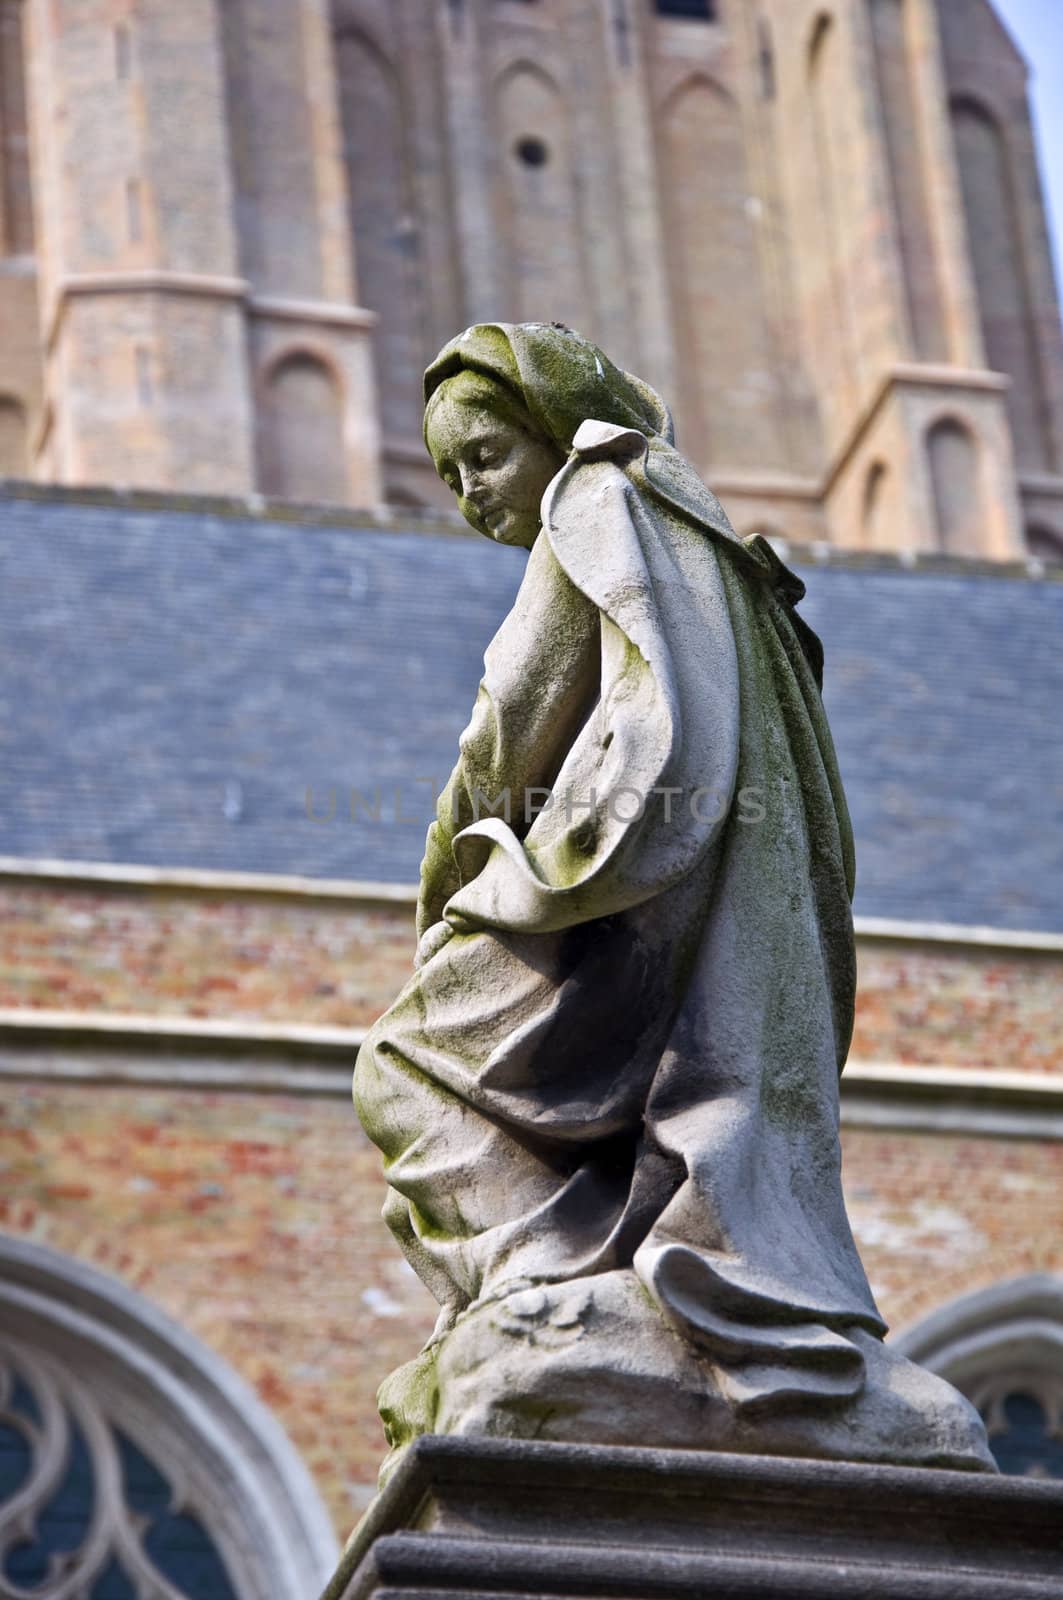 Sculpture of the Blessed Virgin Mary holy in the Catholic background of a Gothic cathedral. Shallow depth of field.